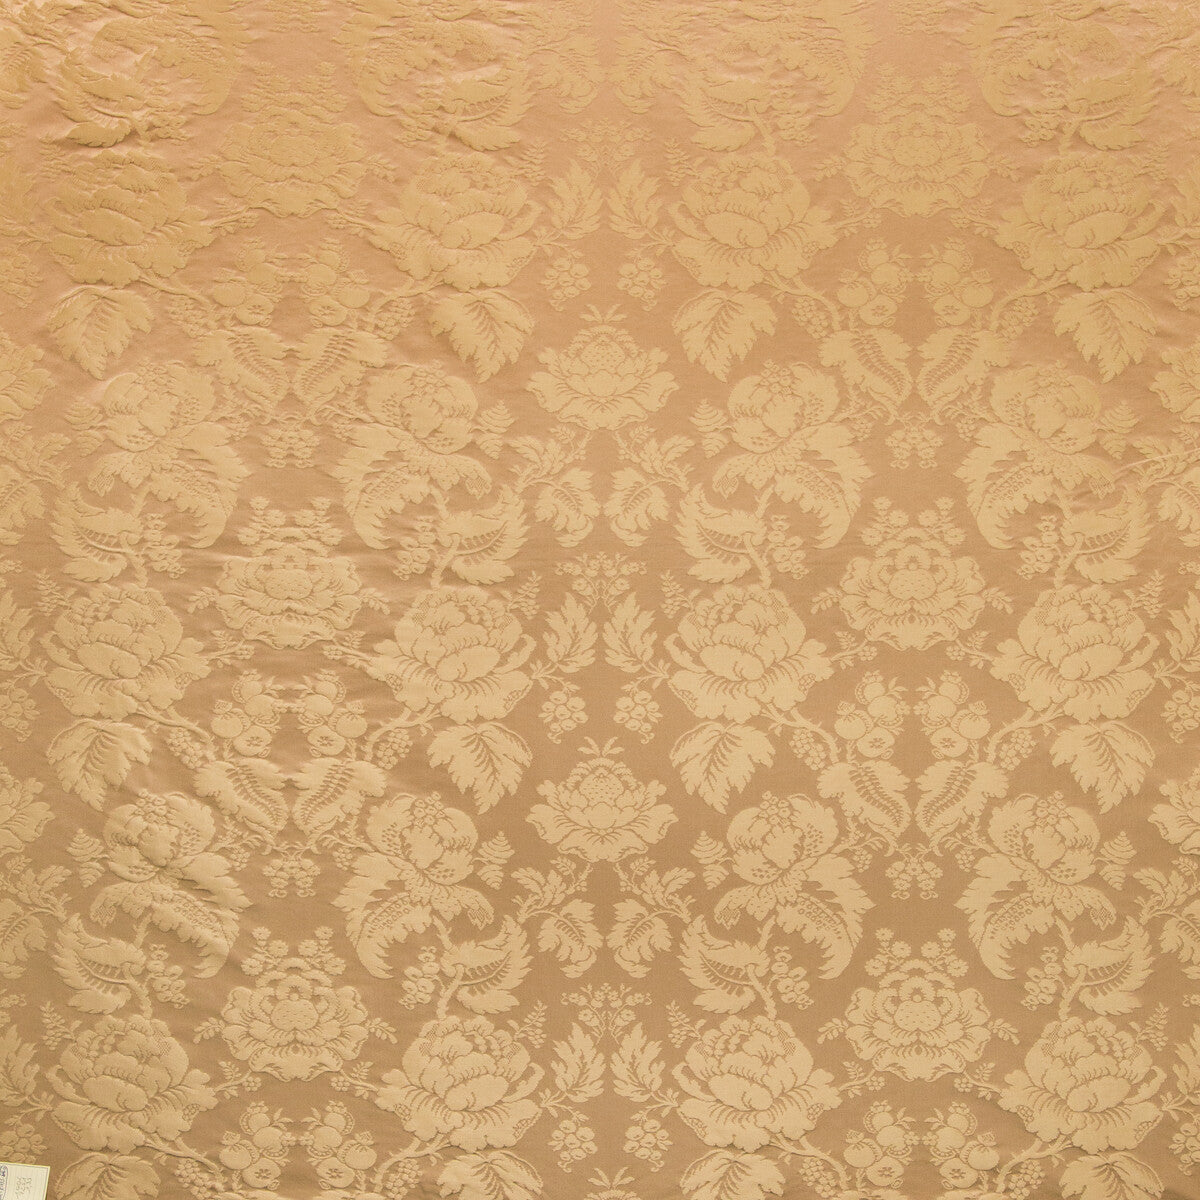 Moulins Damask fabric in wheat color - pattern BR-81035.616.0 - by Brunschwig &amp; Fils